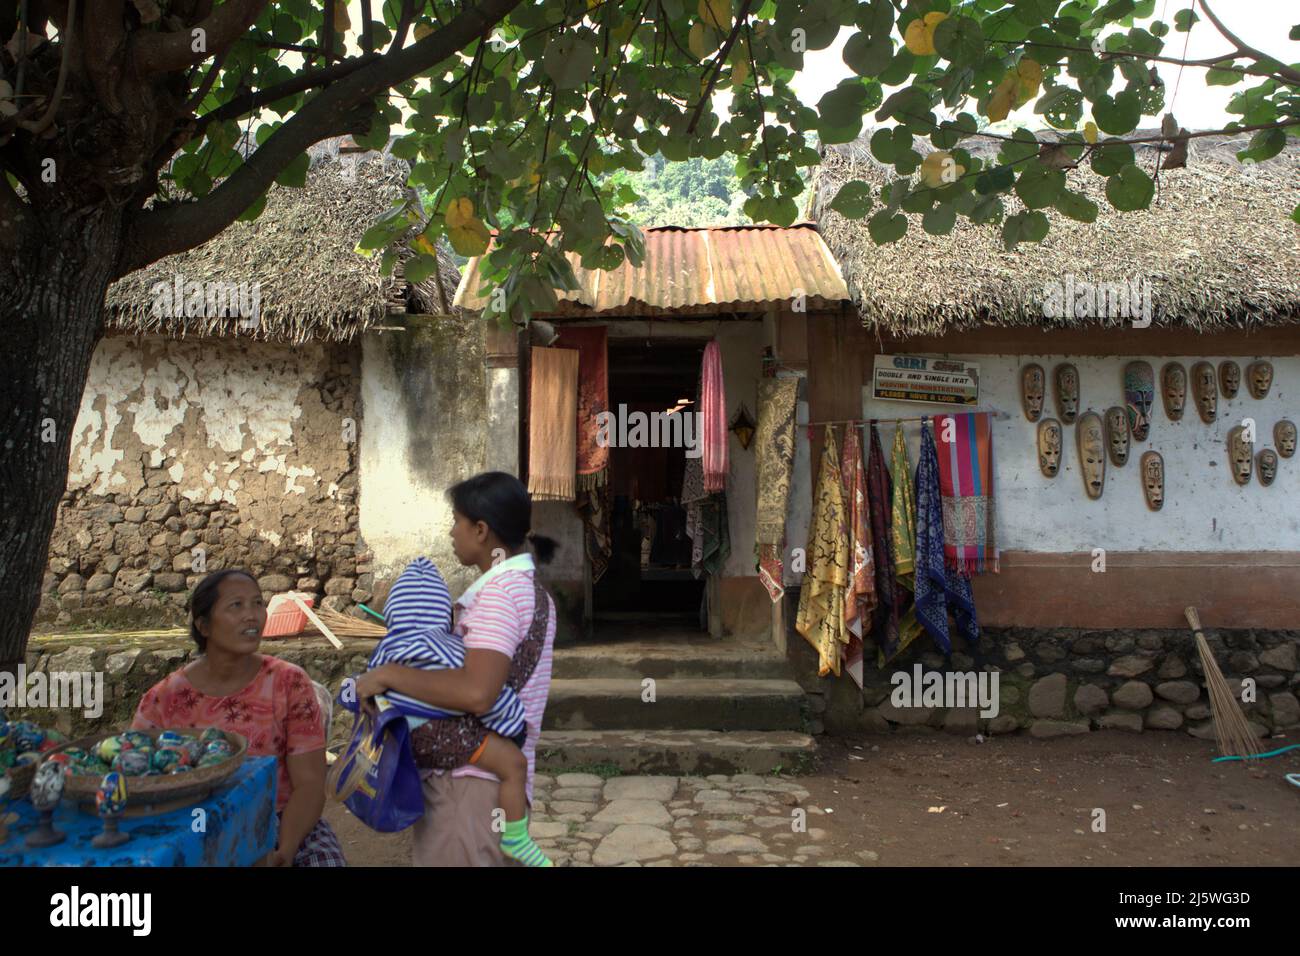 Women having conversation in a background of a house door, where traditional clothes and arts are hanged, in the traditional village of Tenganan Pegringsingan in Karangasem, Bali, Indonesia. Stock Photo